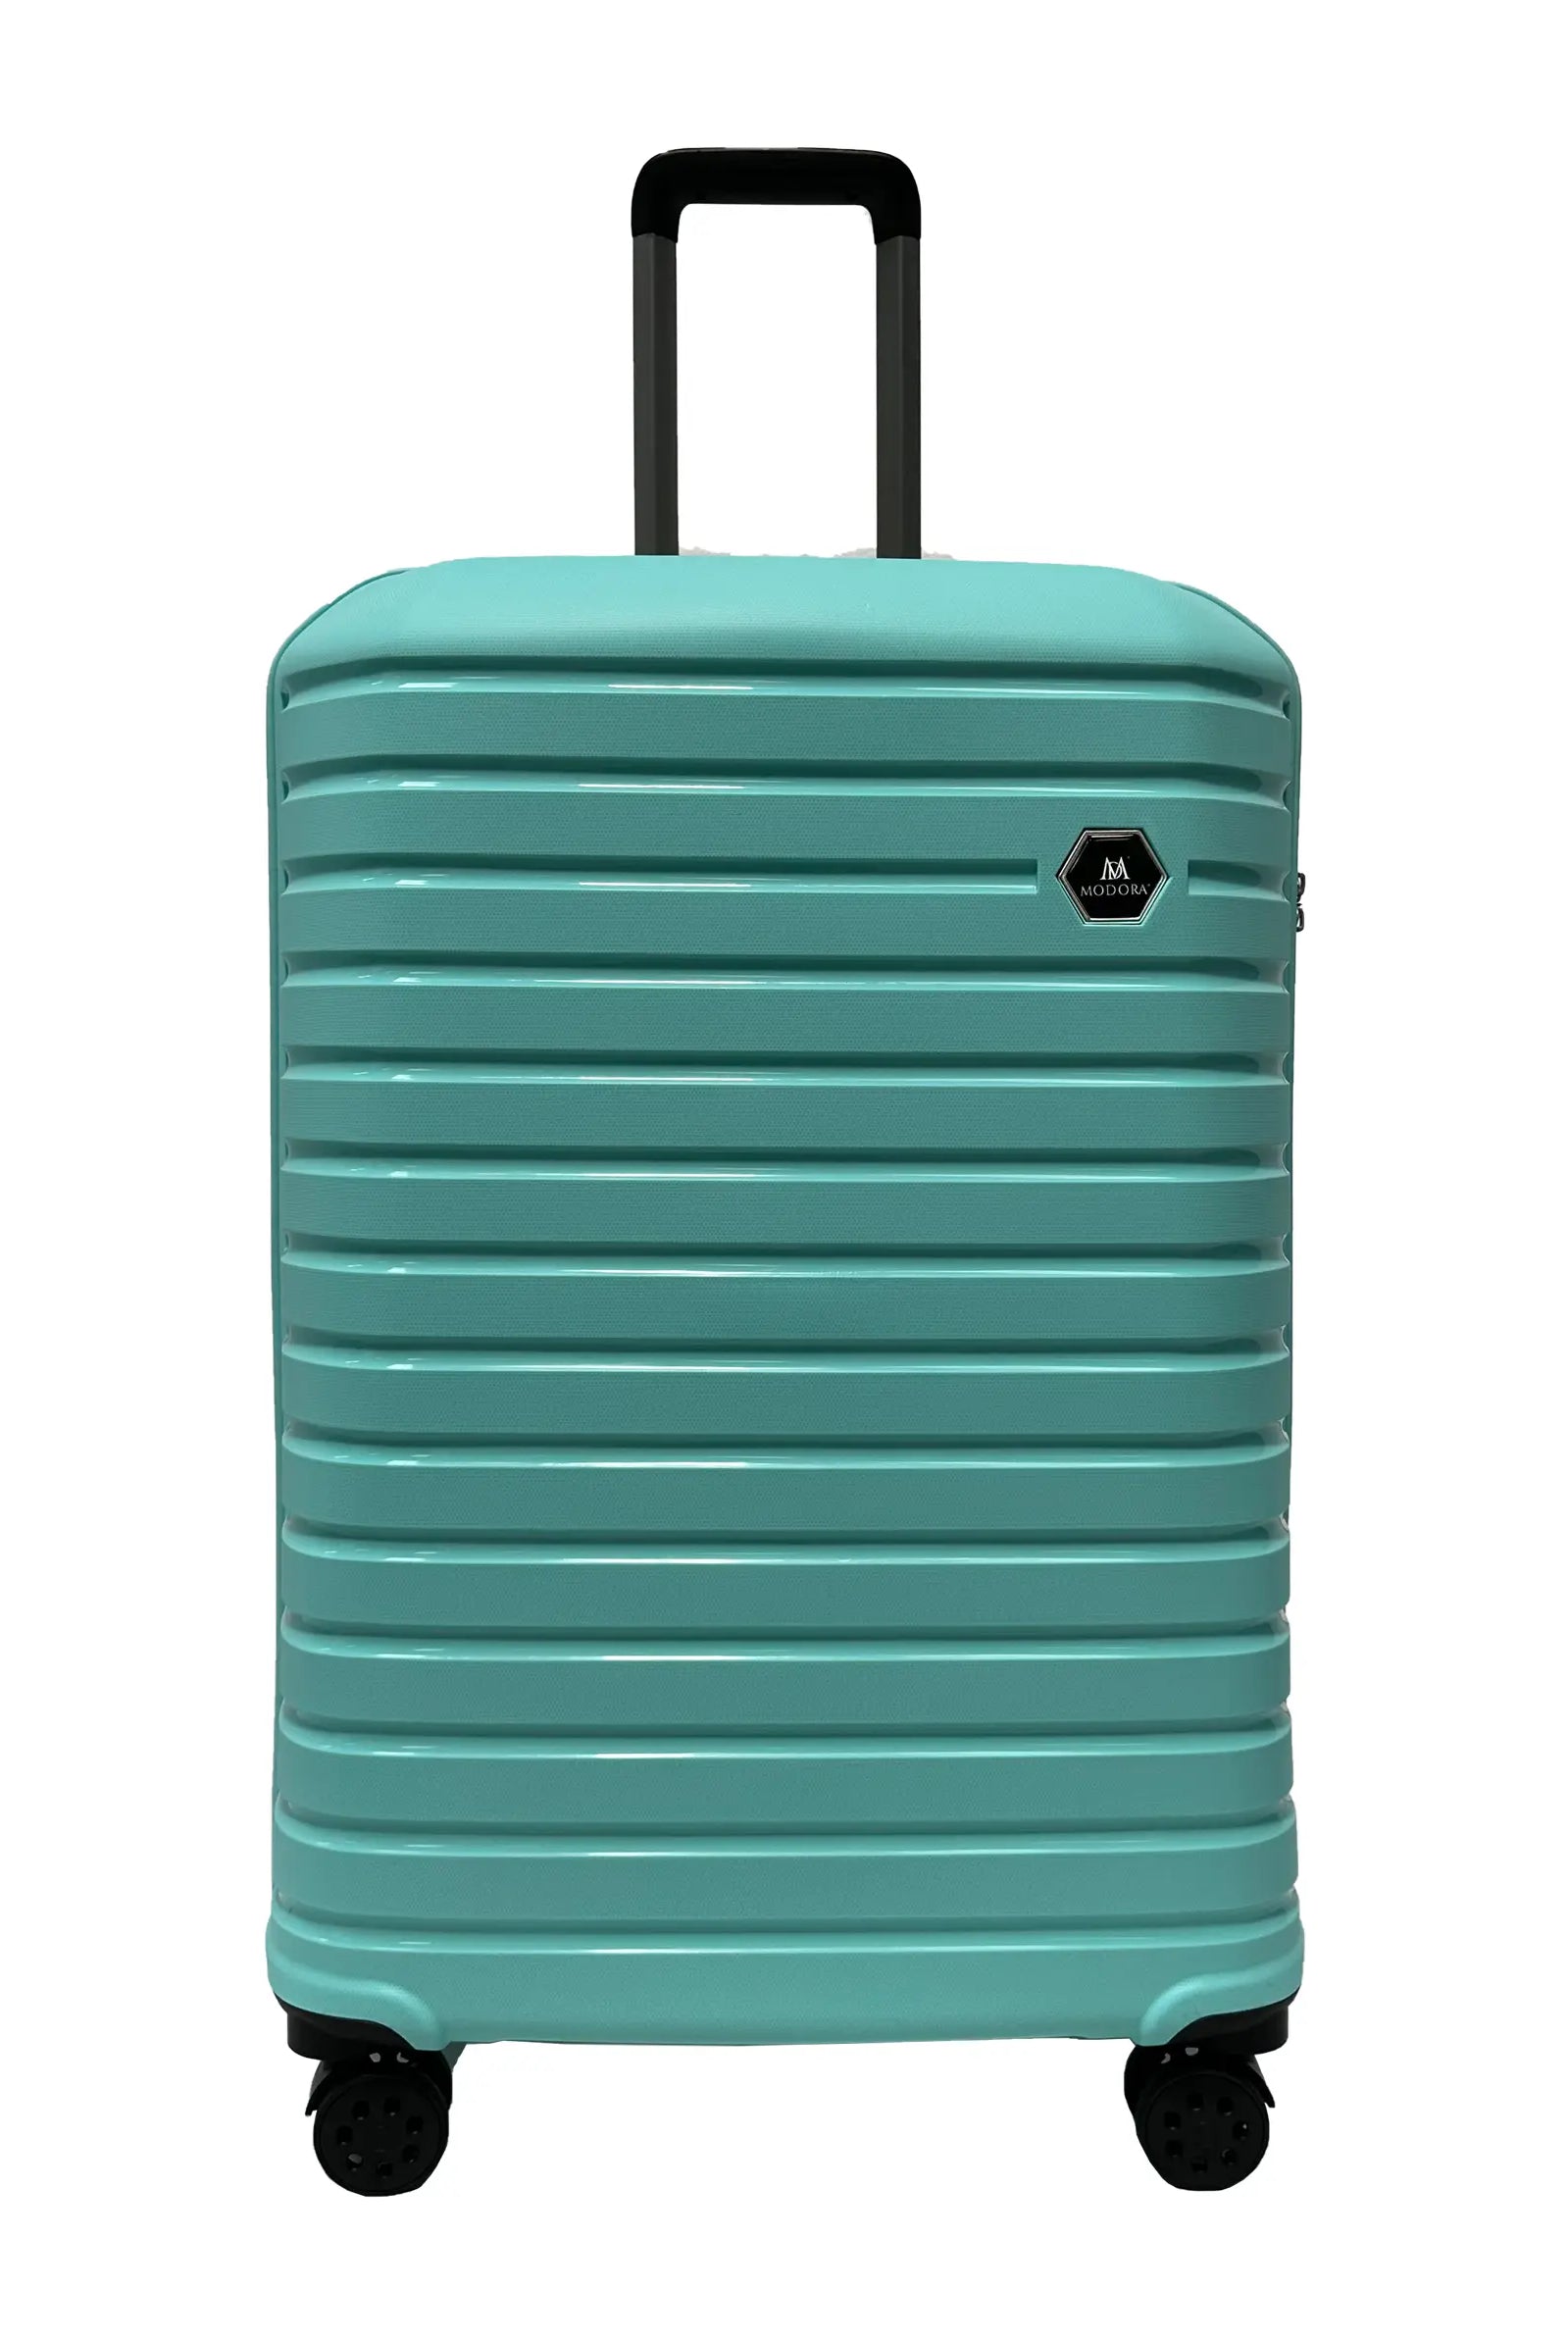 Green large suitcase